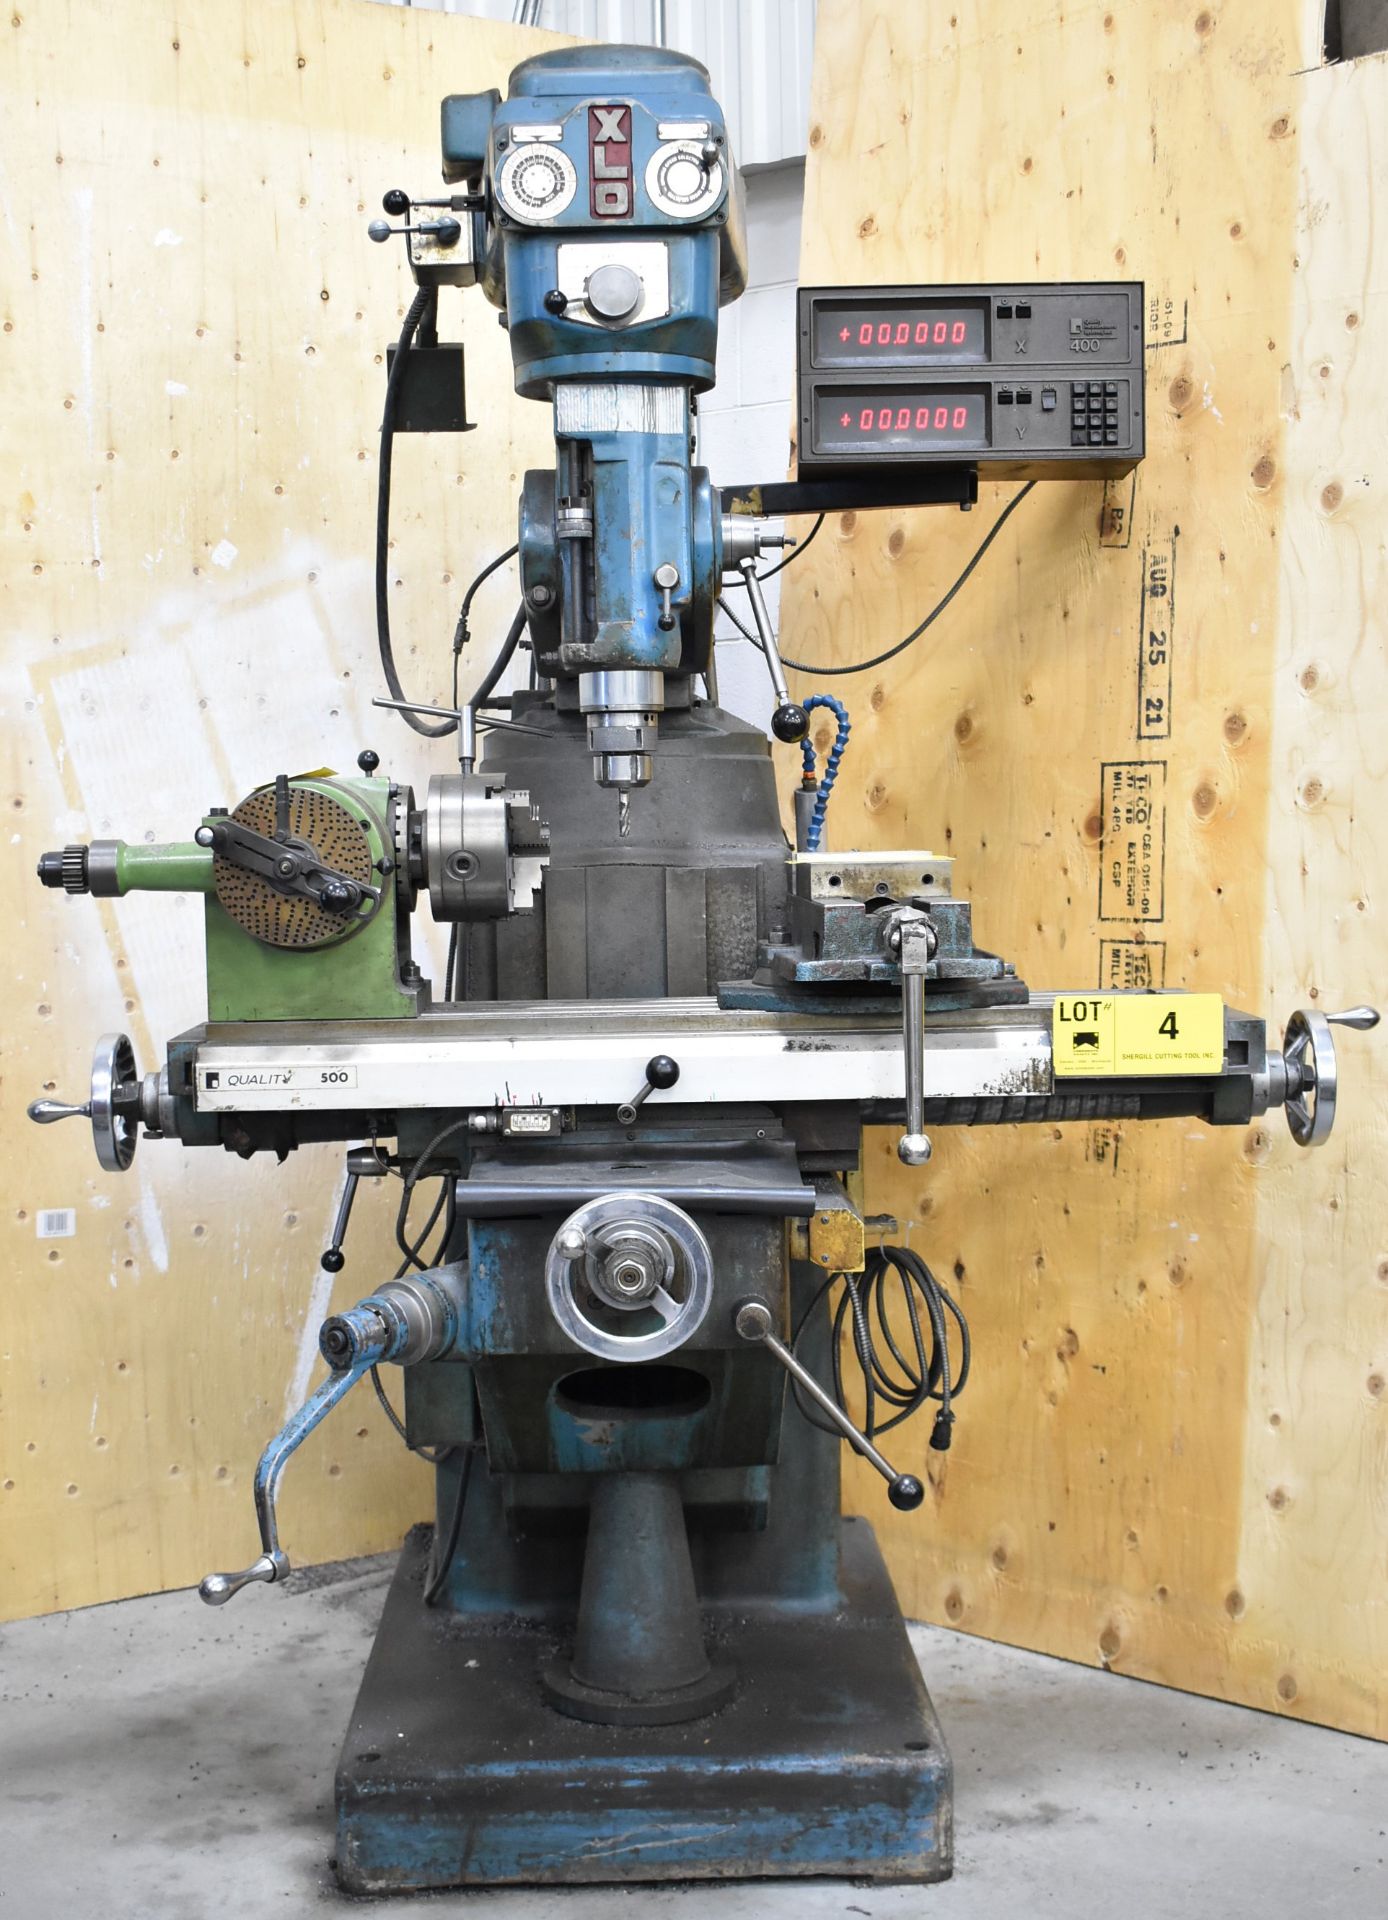 XLO VERTICAL MILLING MACHINE WITH 9" X 42" TABLE, SPEEDS TO 3200 RPM XACT 400 2-AXIS DRO, 600V/3PH/